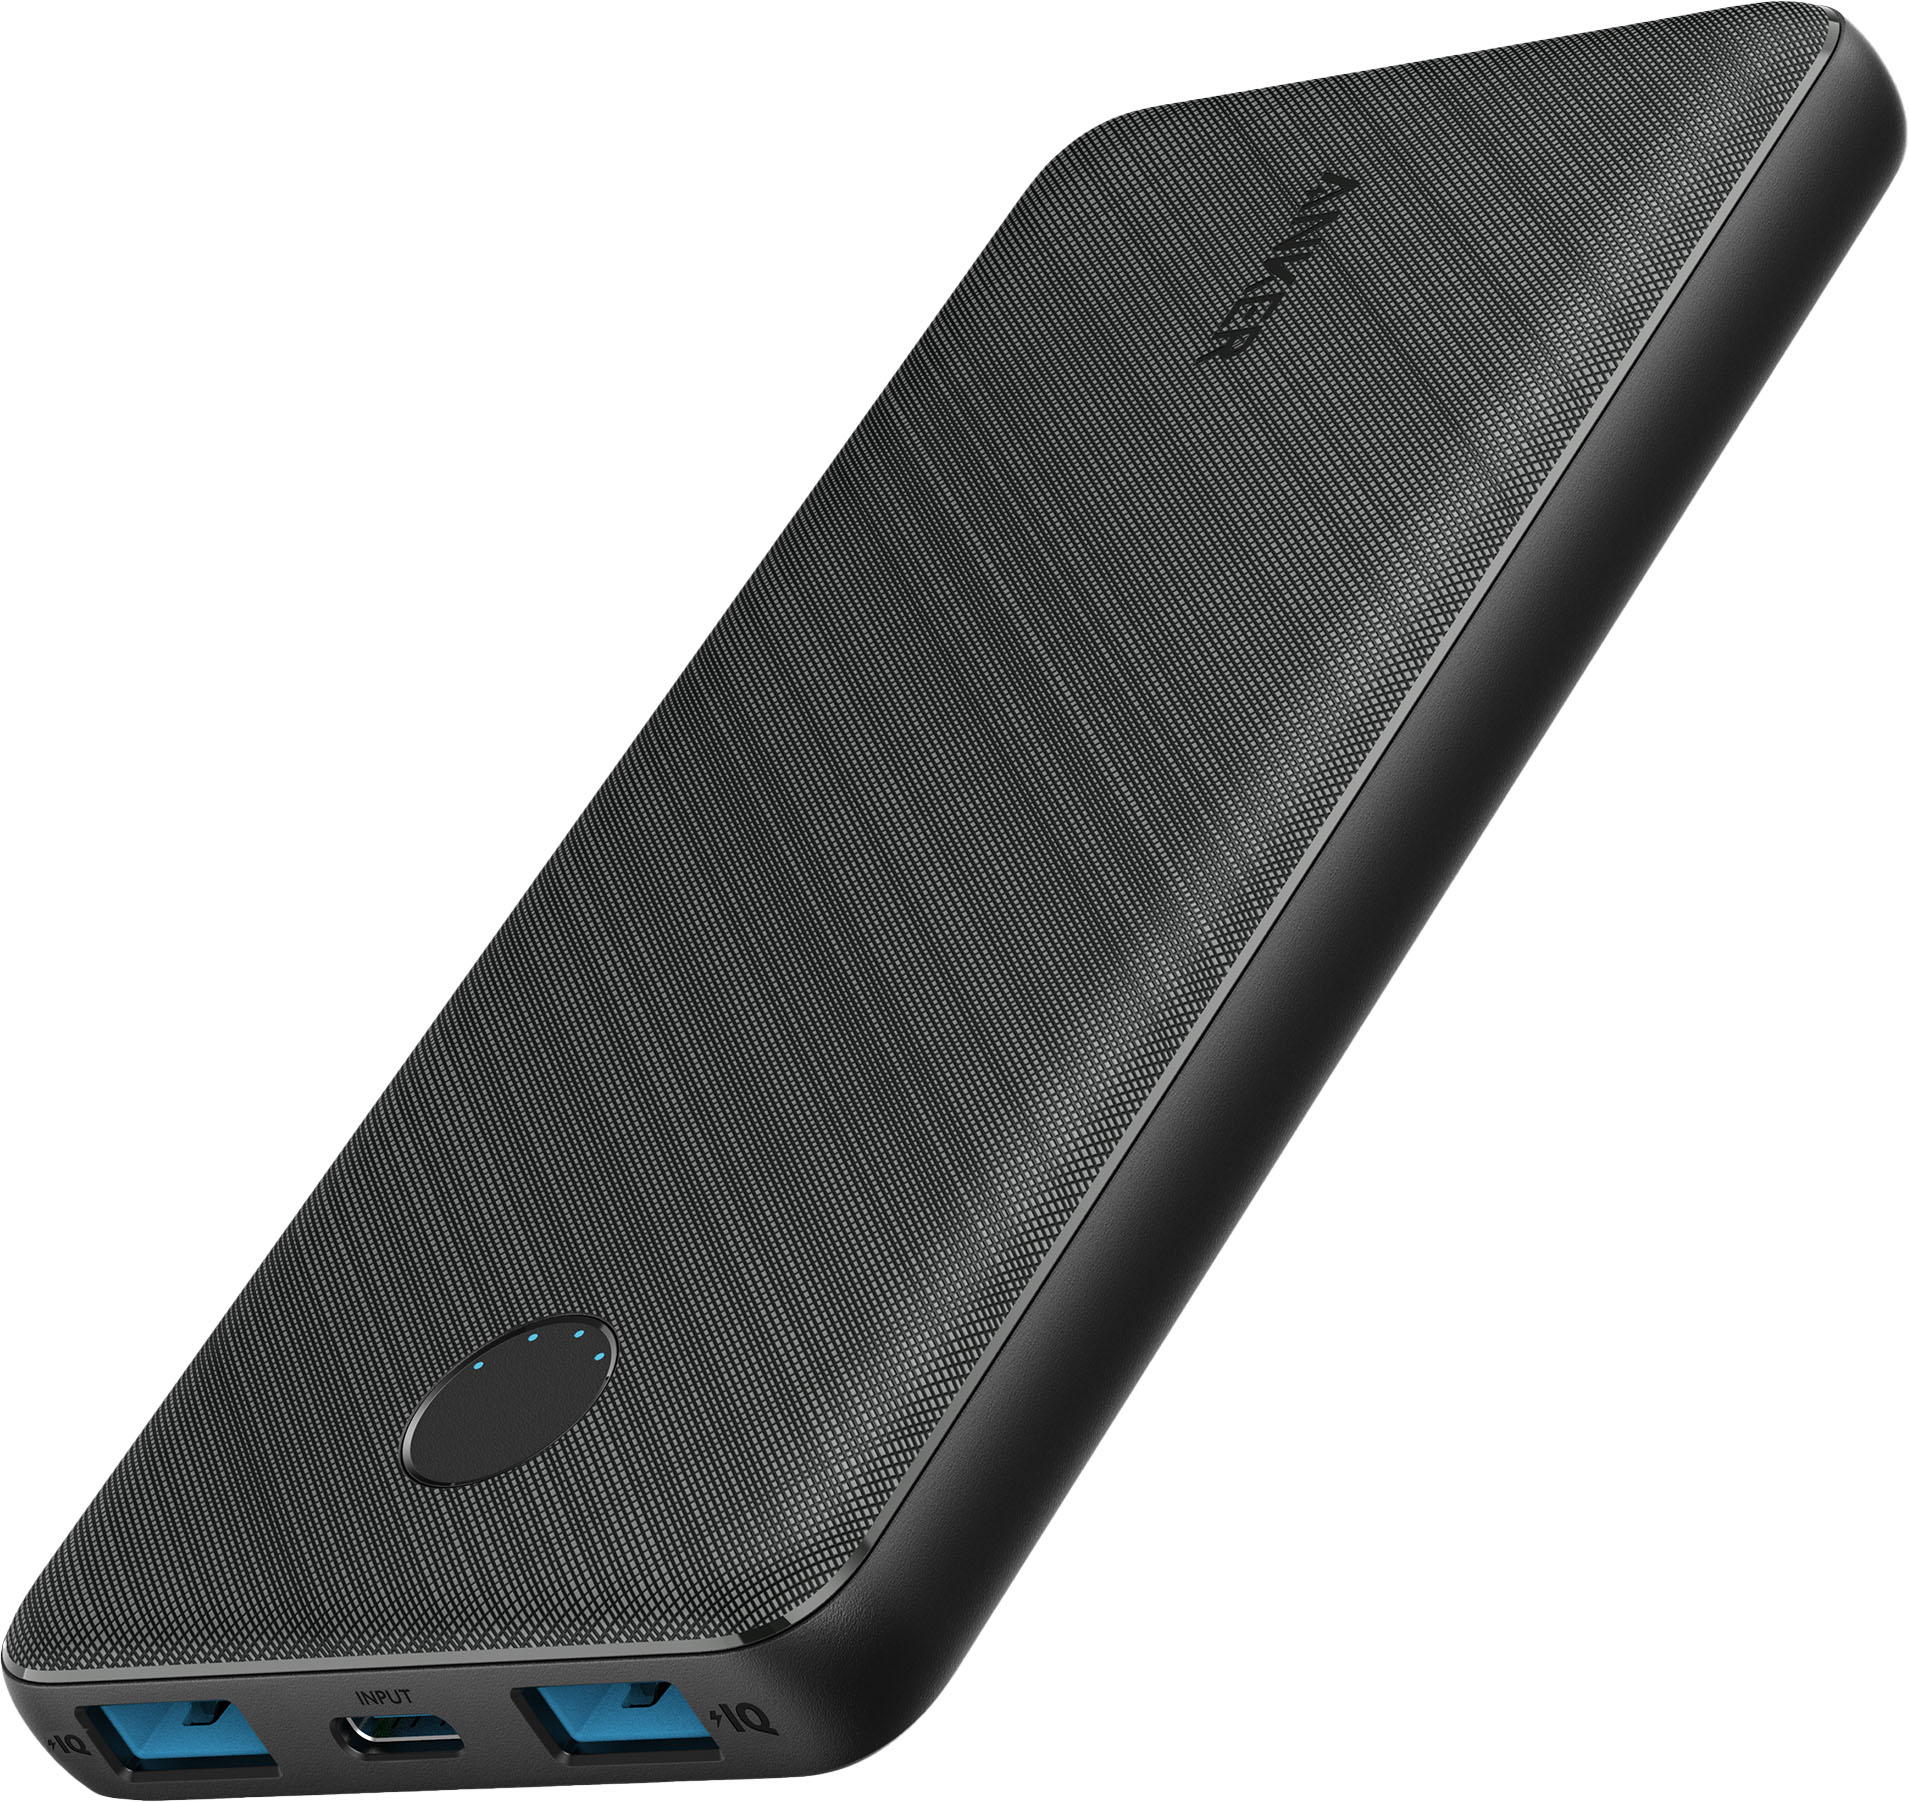 Udfyld spørgeskema Flyve drage Anker PowerCore III 10K mAh USB-C Portable Battery Charger Black A1247H11-1  - Best Buy